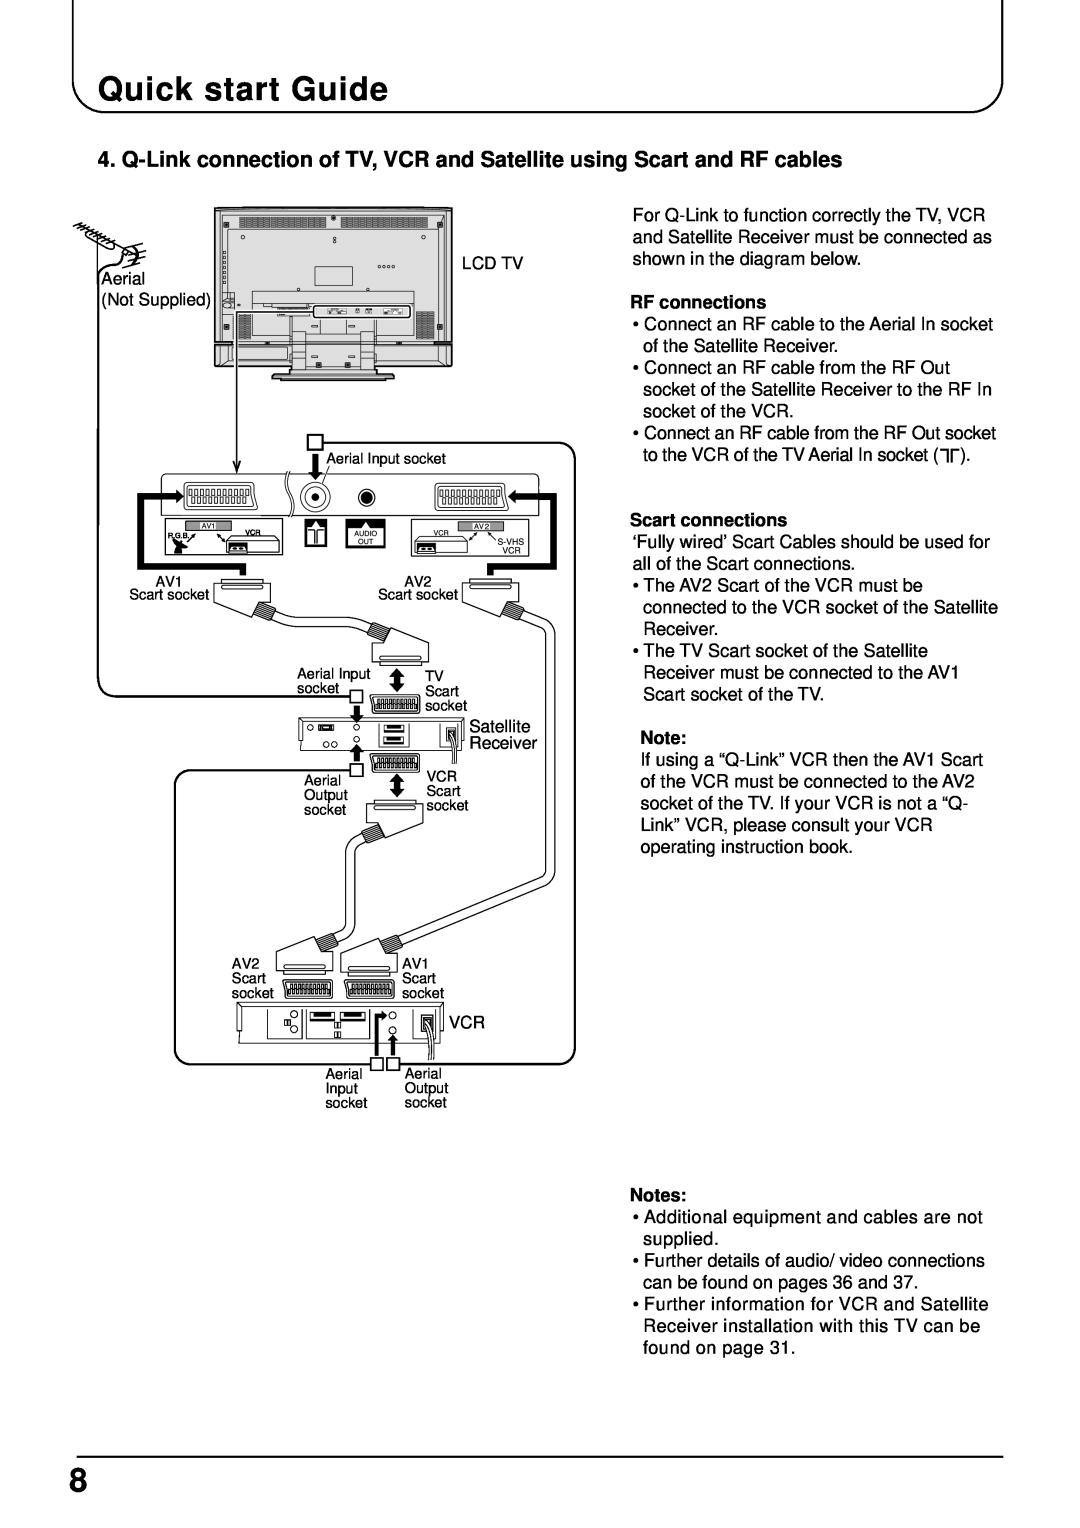 Panasonic TX-22LT2 manual Quick start Guide, RF connections, Scart connections 